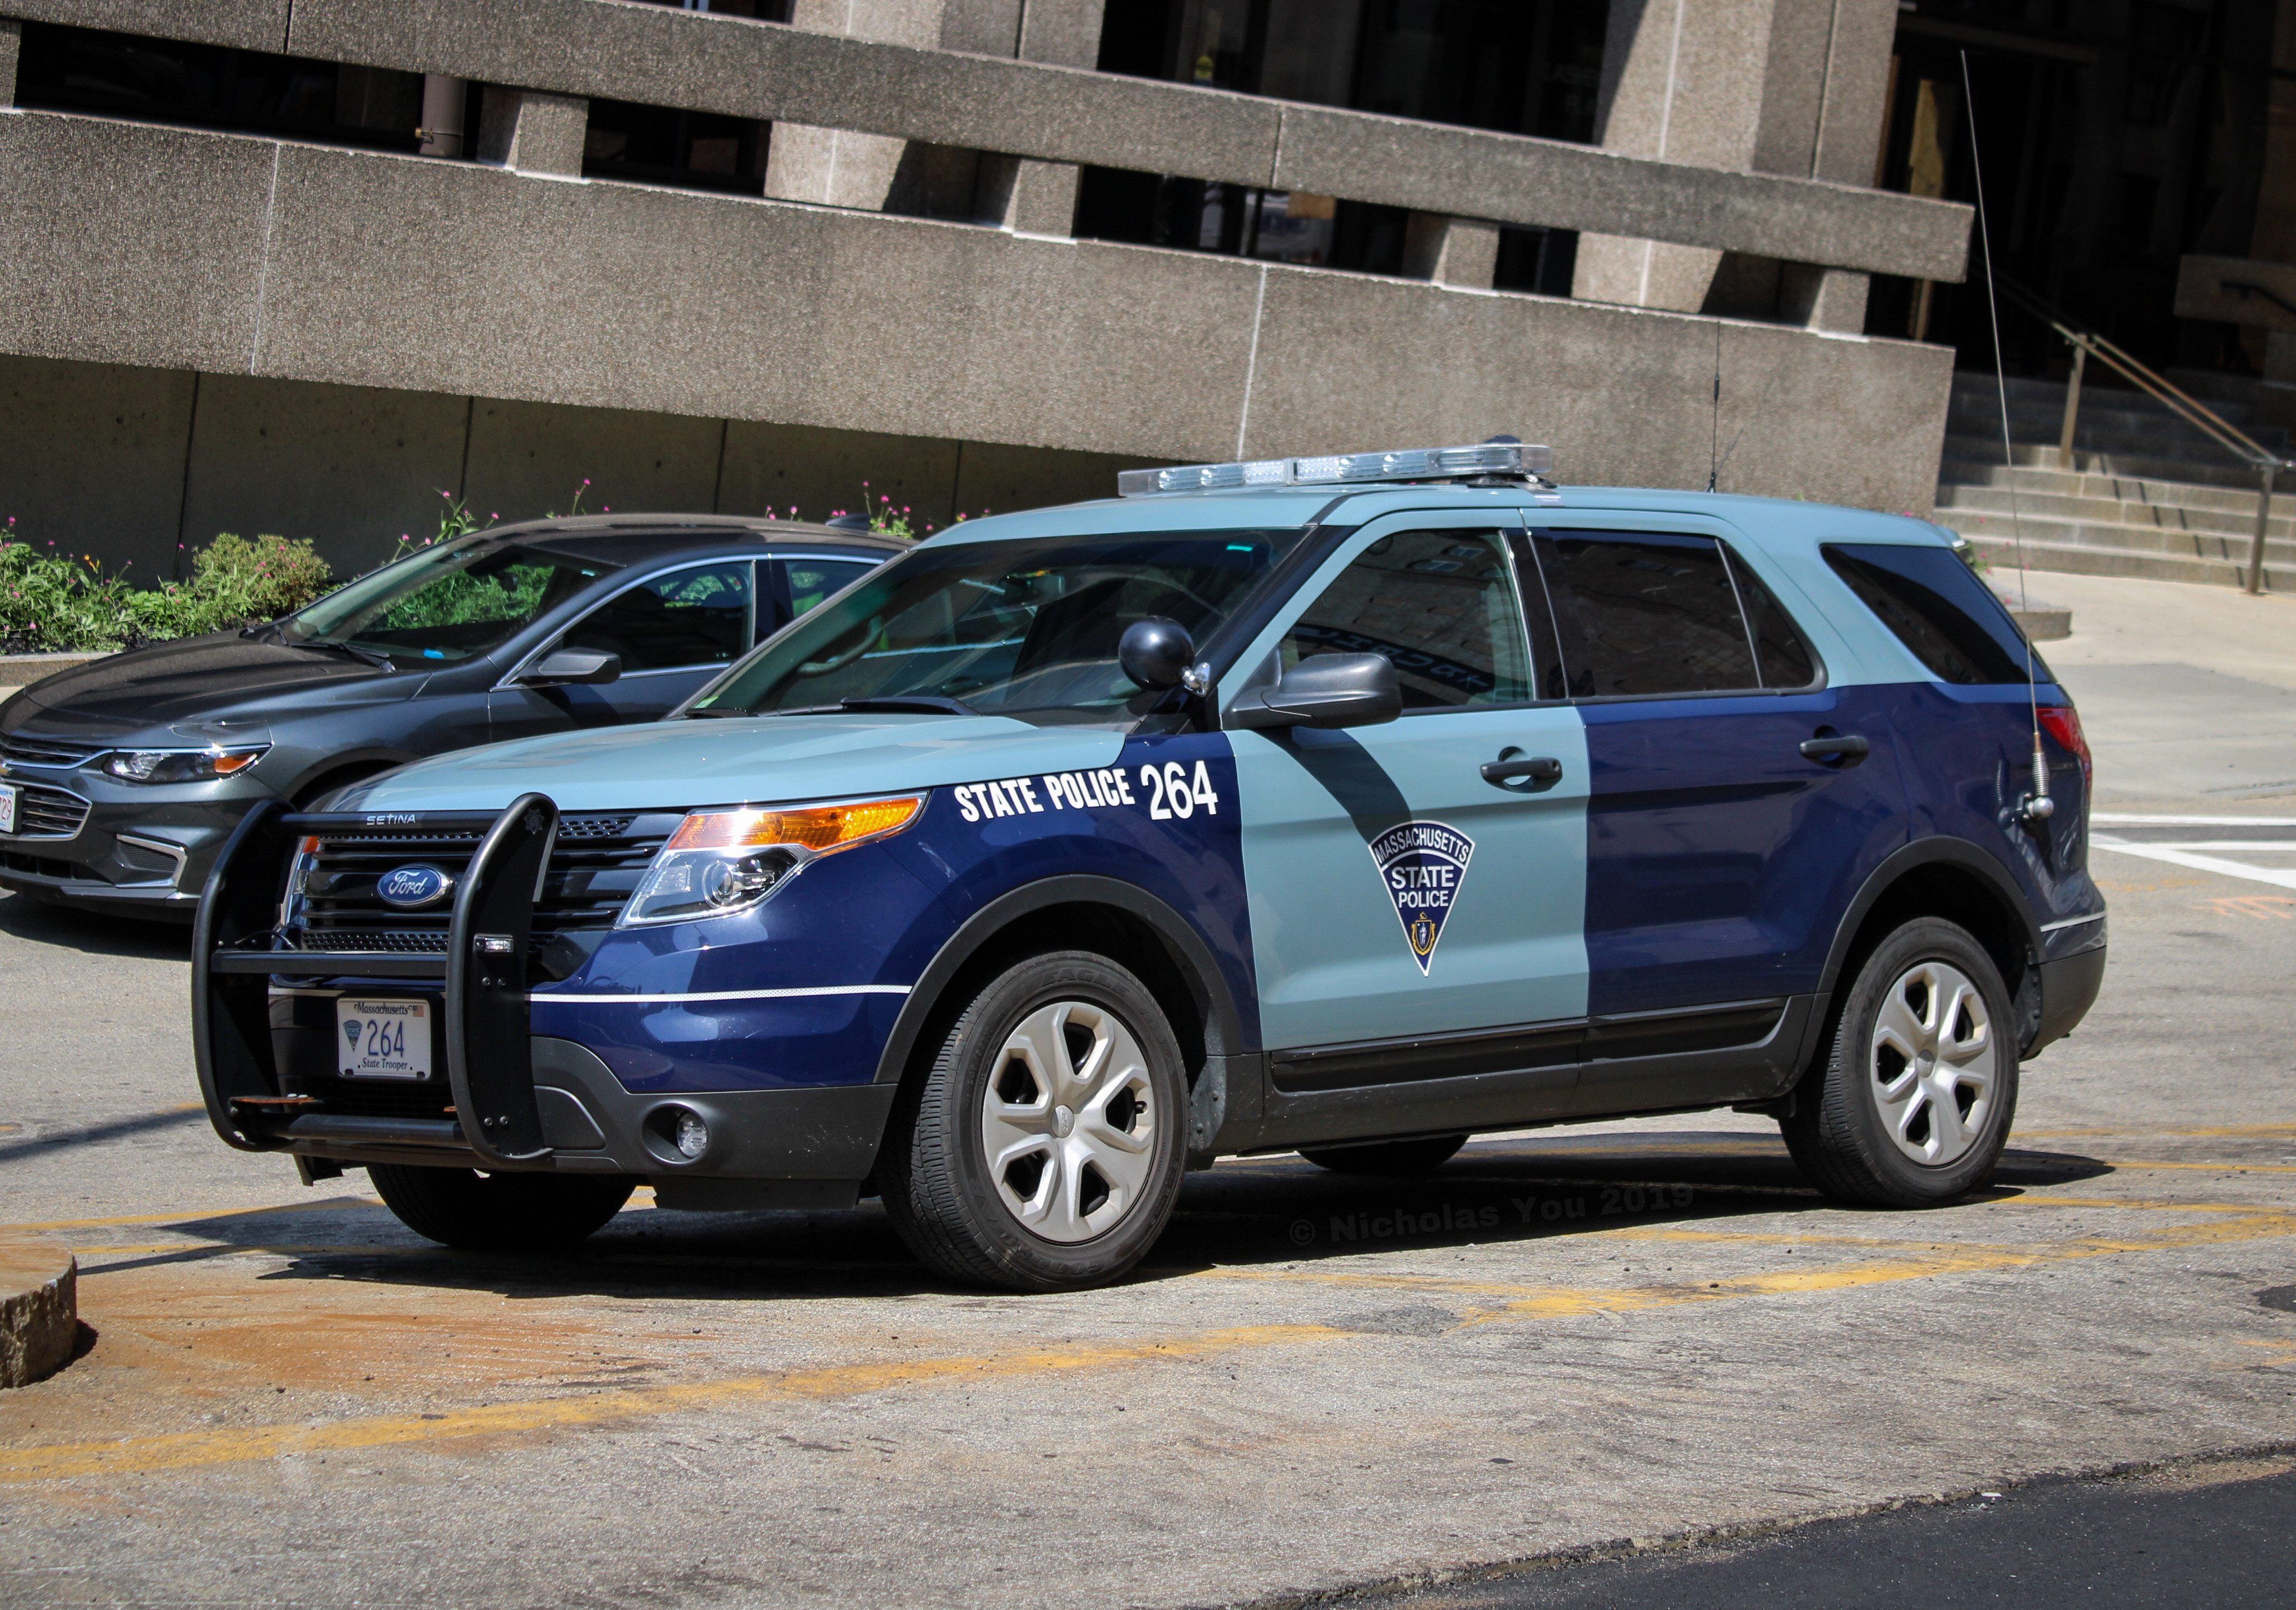 A photo  of Massachusetts State Police
            Cruiser 264, a 2015 Ford Police Interceptor Utility             taken by Nicholas You